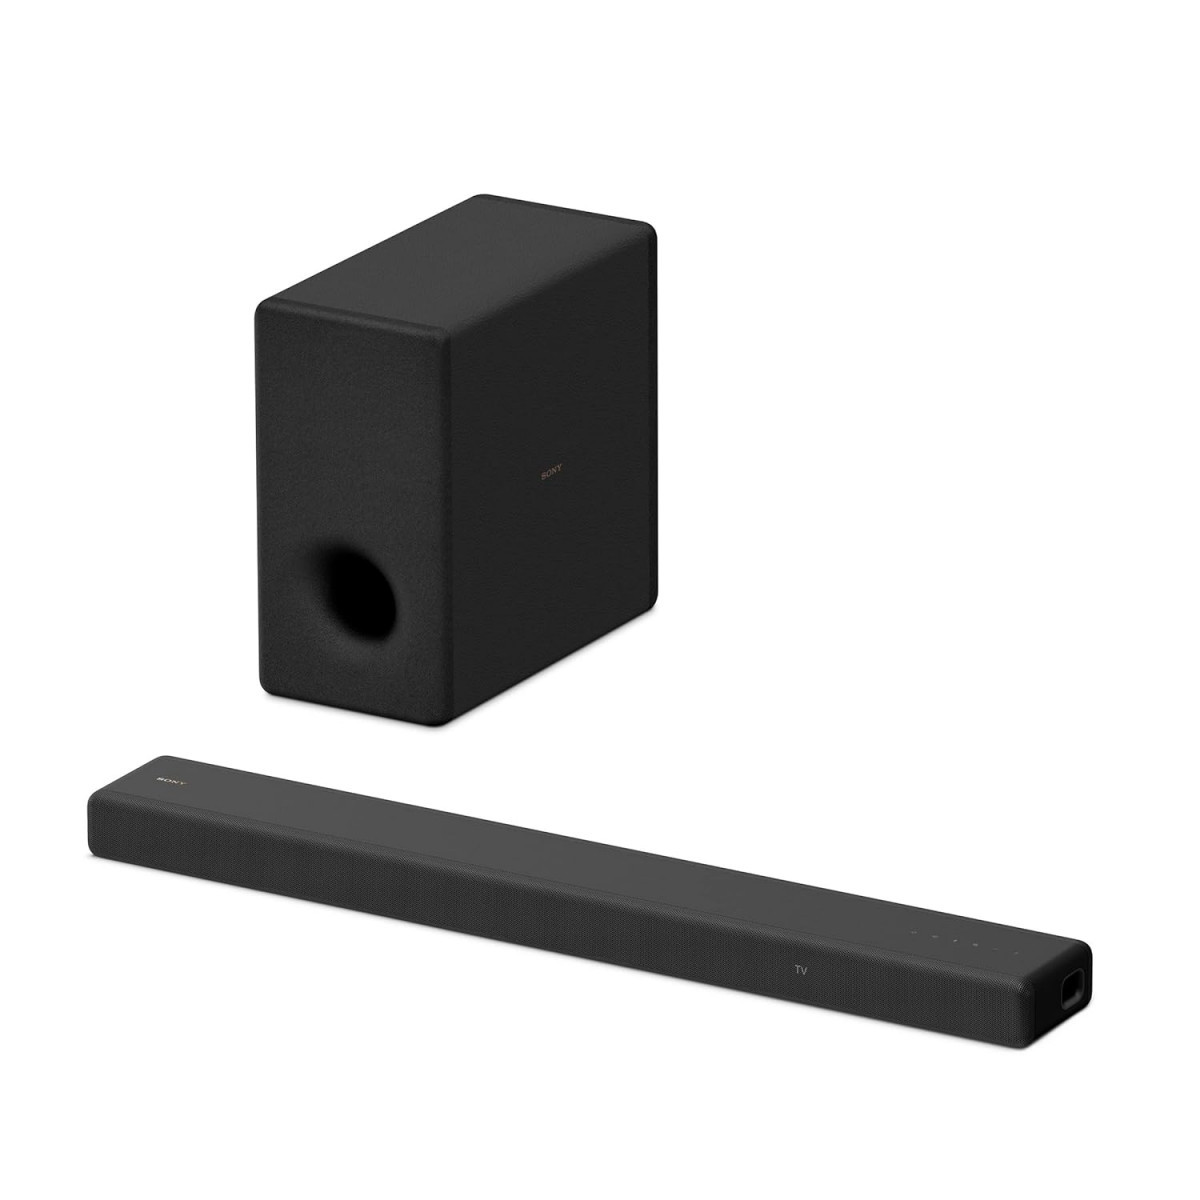 Sony HT-A3000 A Series Premium Soundbar 31Ch 360 Spatial Sound Mapping Surround Sound Home Theatre System with wireless subwoofer SA-SW3Dolby Atmos360RABTHDMI eArcOpticalAlexaSpotifyBlack